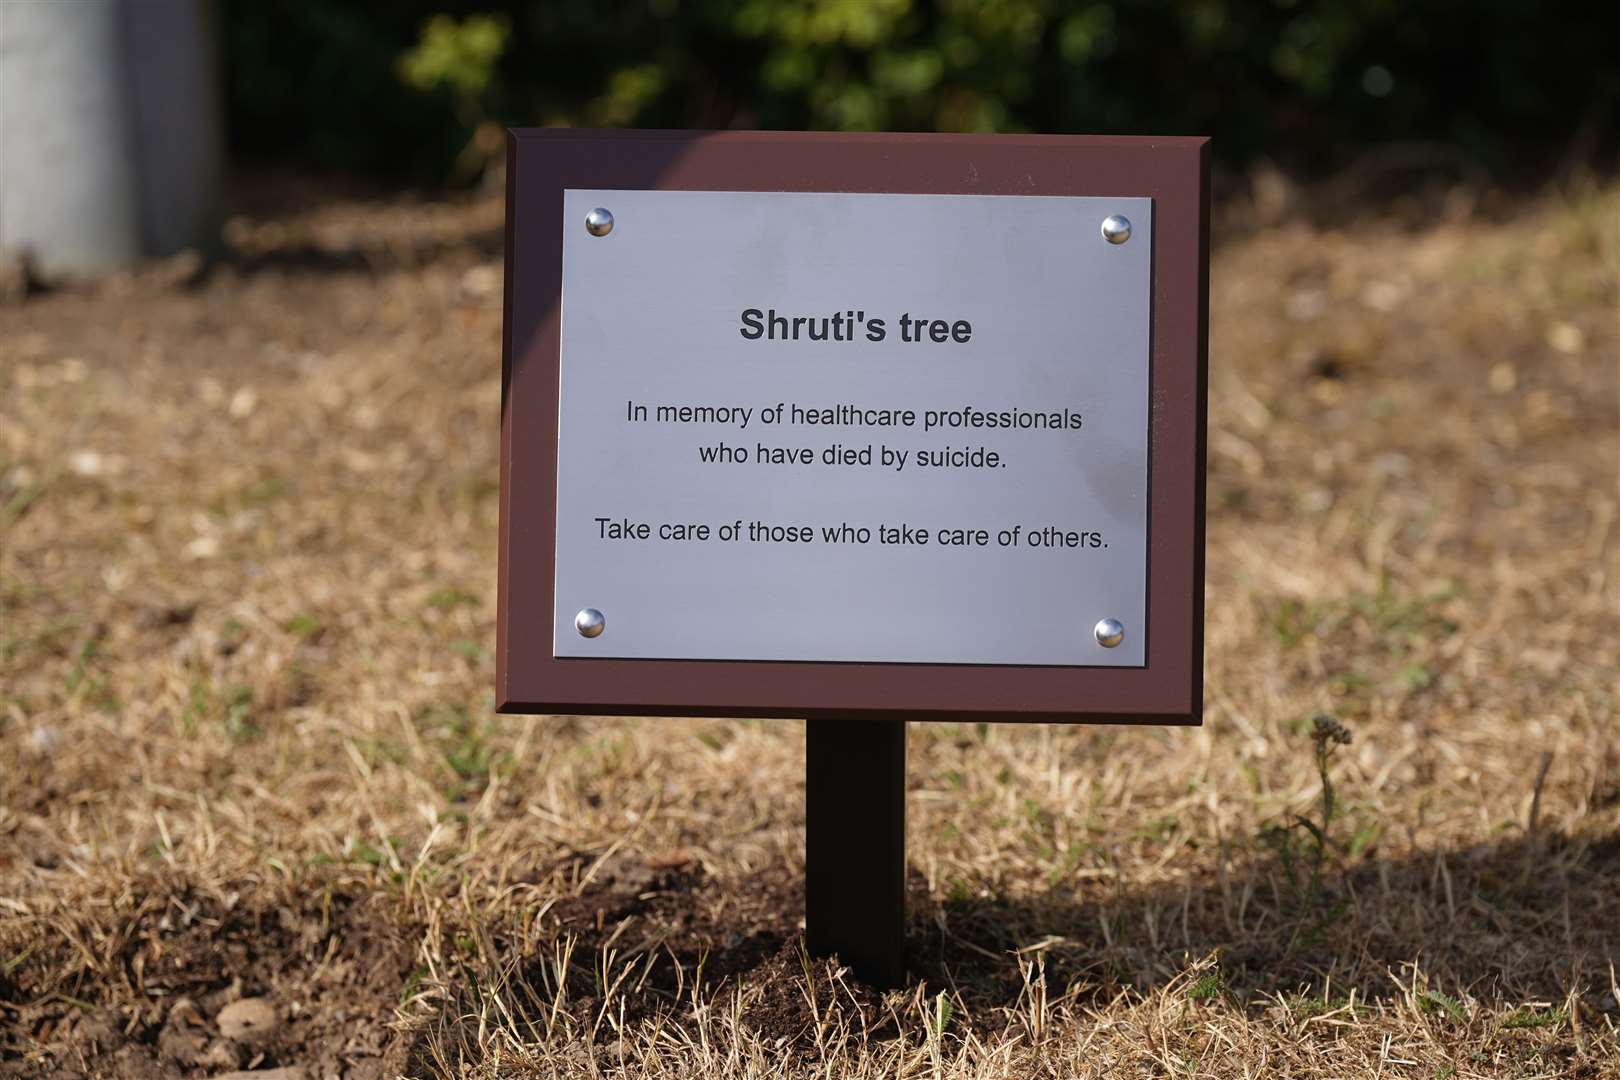 The Shruti tree is named after Shruti Acharya, a student doctor in Kay’s series who took her own life (Yui Mok/PA)